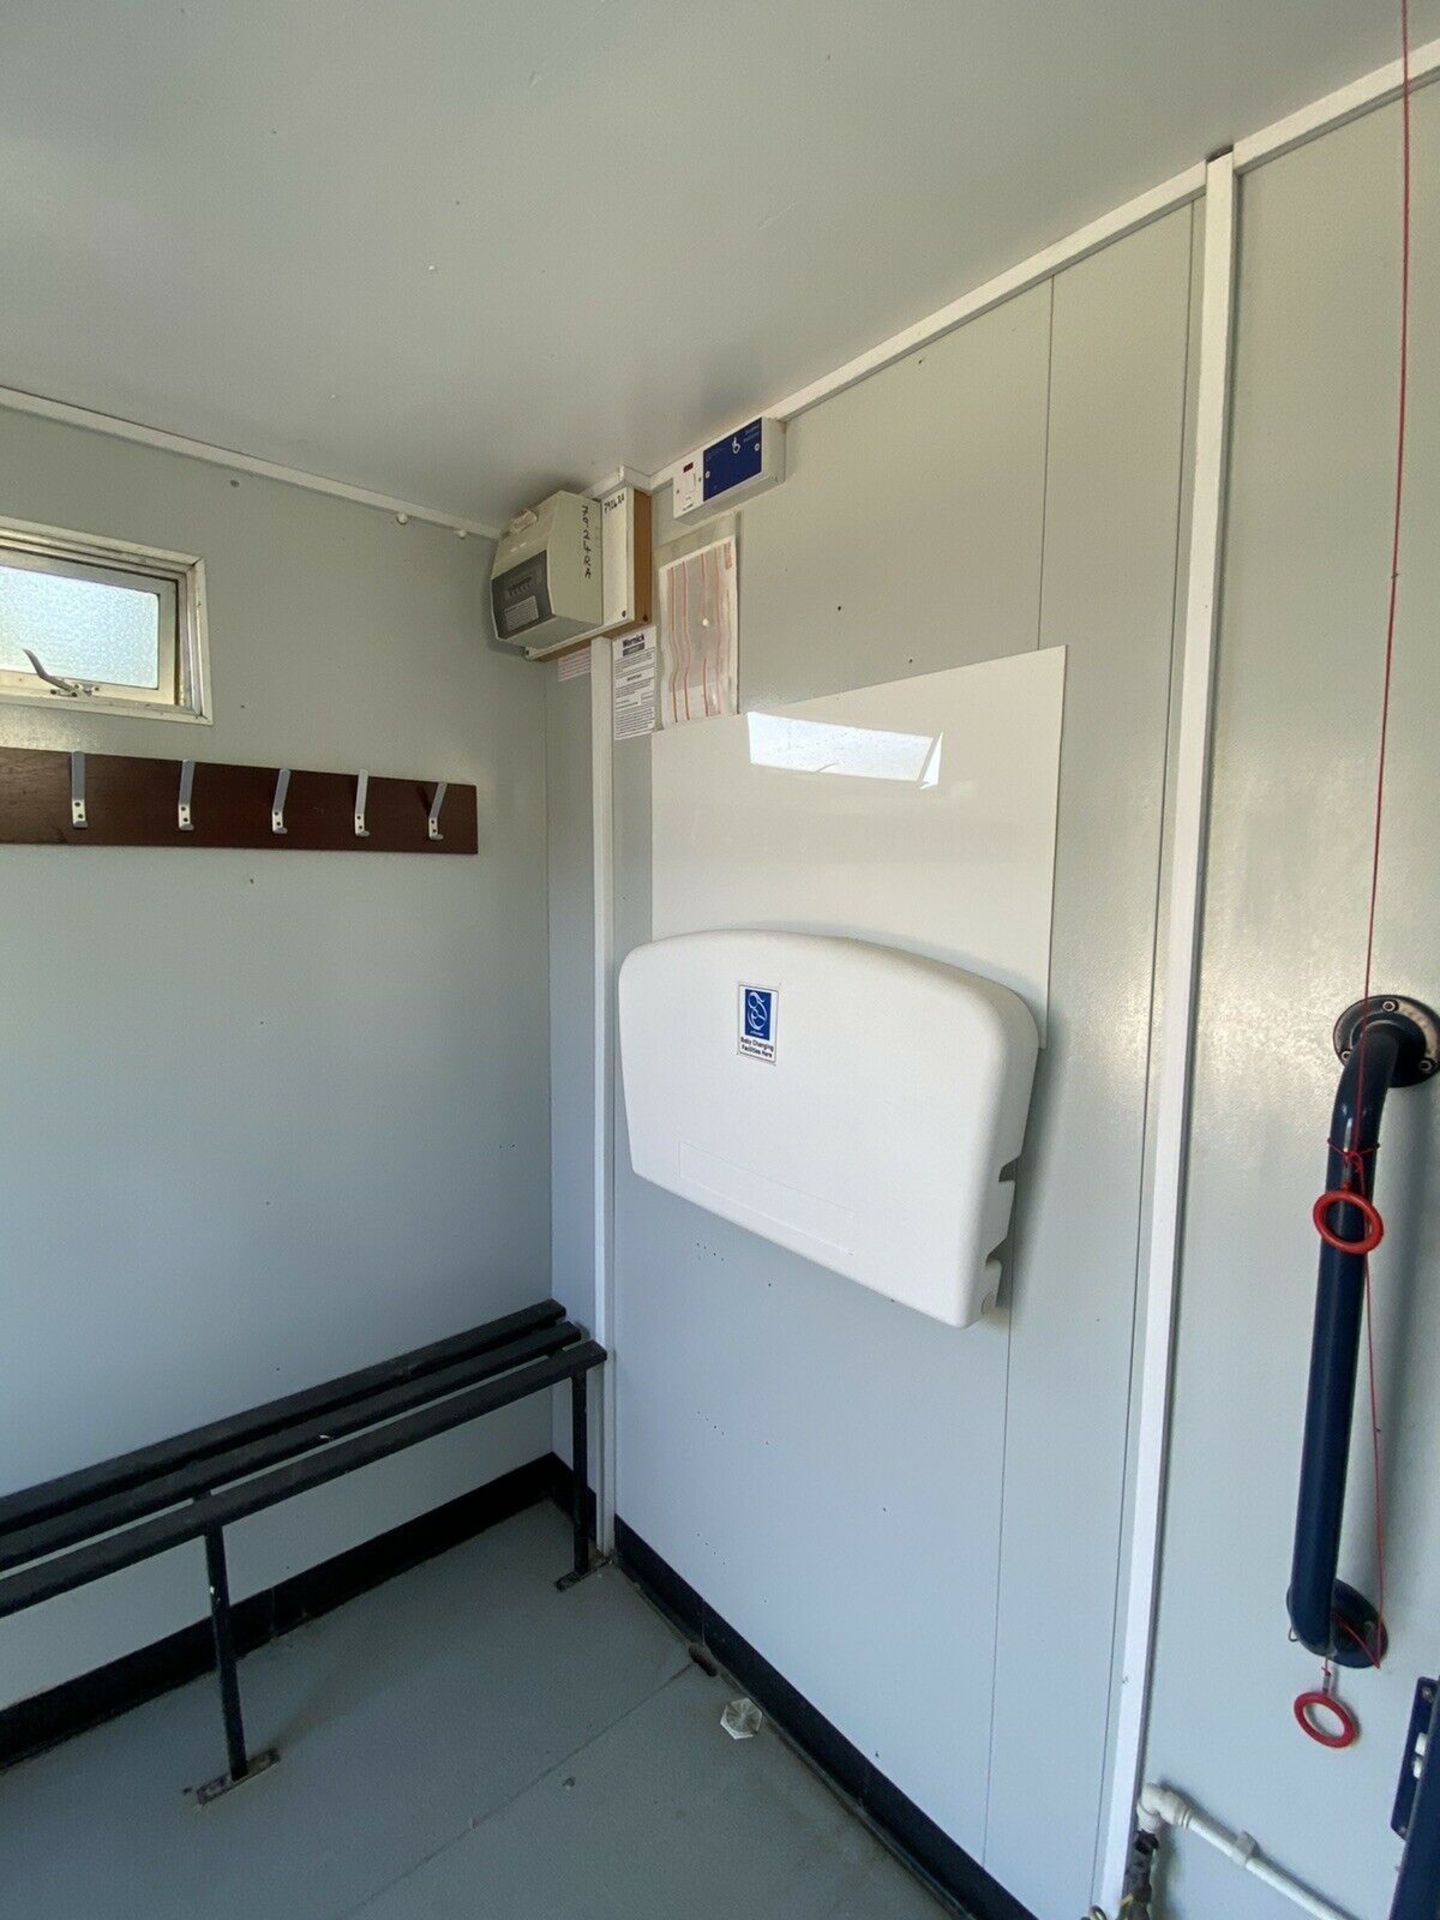 8ft X 8ft Disabled Toilet Block - Image 3 of 8